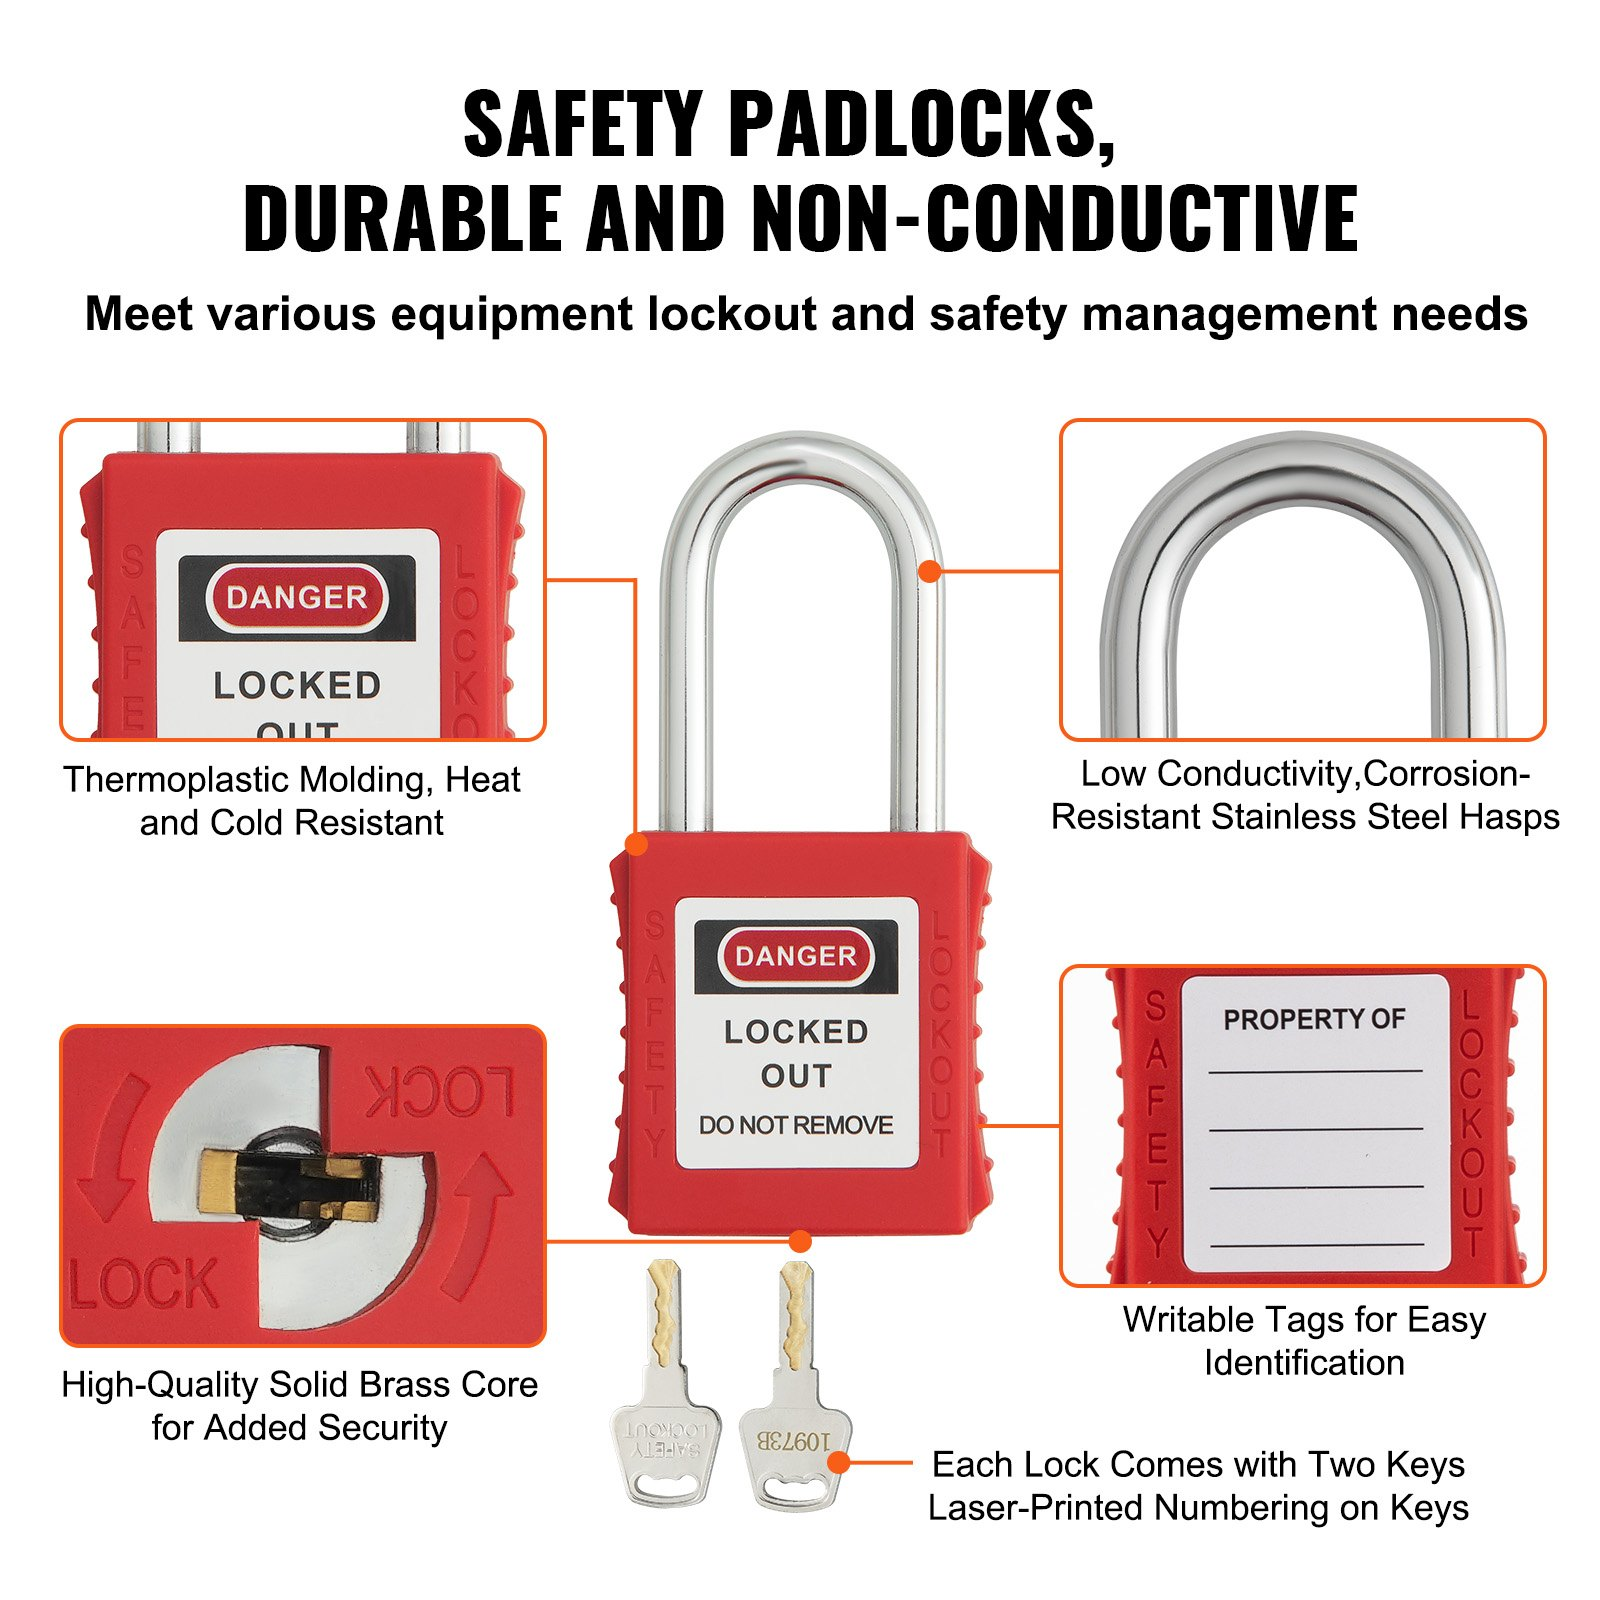 VEVOR Electrical Lockout Tagout Kit, 26 PCS Safety Loto Kit Includes Padlocks, Hasps, Tags, Nylon Ties, and Carrying Bag, Lockout Tagout Safety Tools for Industrial, Electric Power, Machinery, Goodies N Stuff